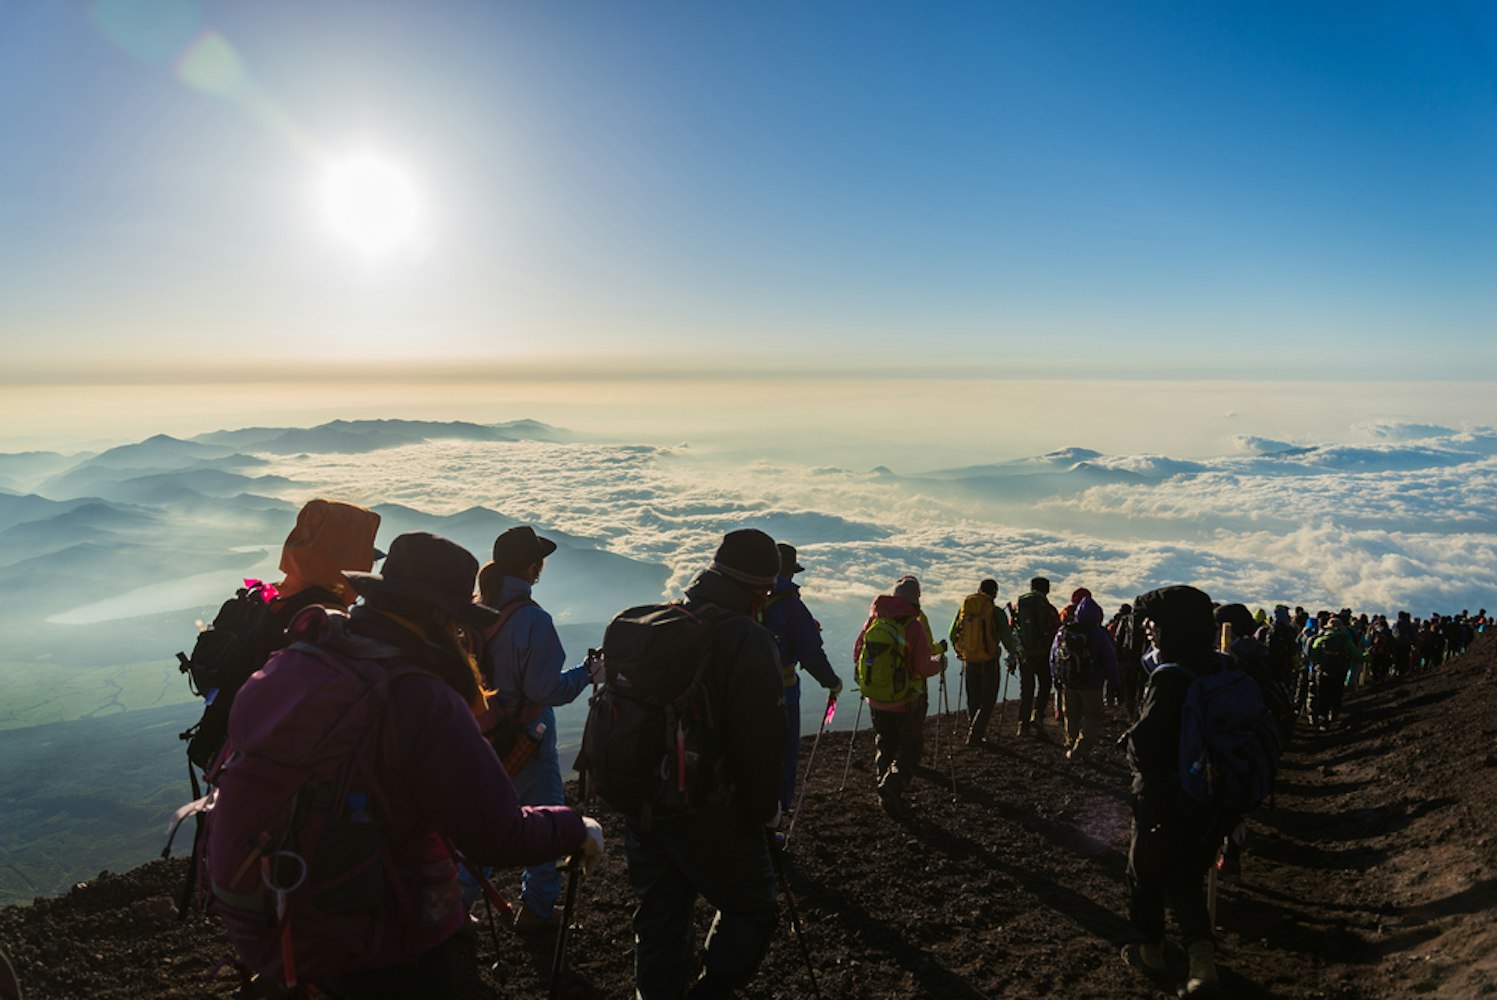 Hikers Gather During Sunrise on the MT. Fuji